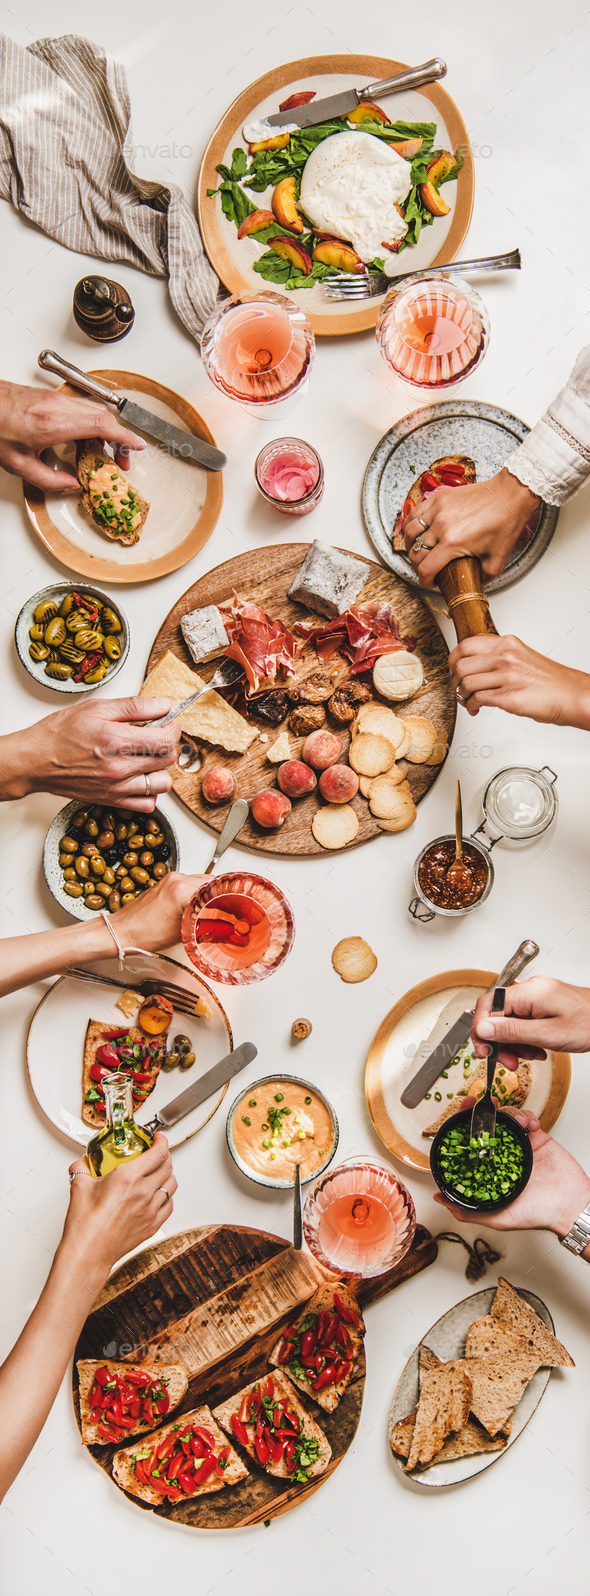 Family wine and snack party. Flay-lay of peoples hands eating and drinking rose wine over table with cheese, fruit, smoked meat, tomato brushettas, buratta salad, top view. Wine tasting concept